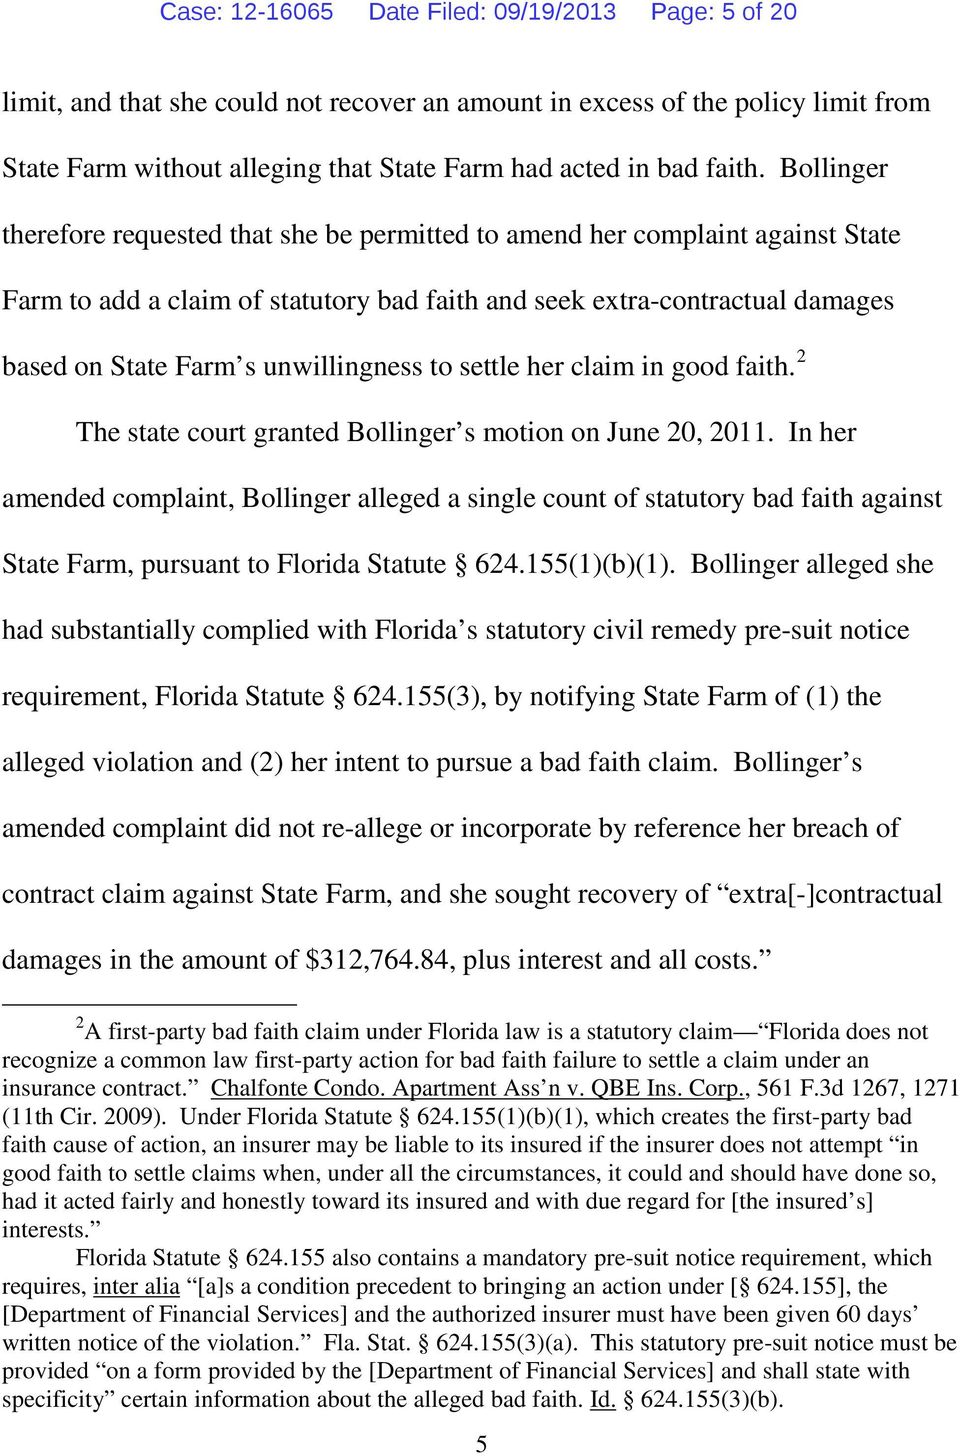 Bollinger therefore requested that she be permitted to amend her complaint against State Farm to add a claim of statutory bad faith and seek extra-contractual damages based on State Farm s